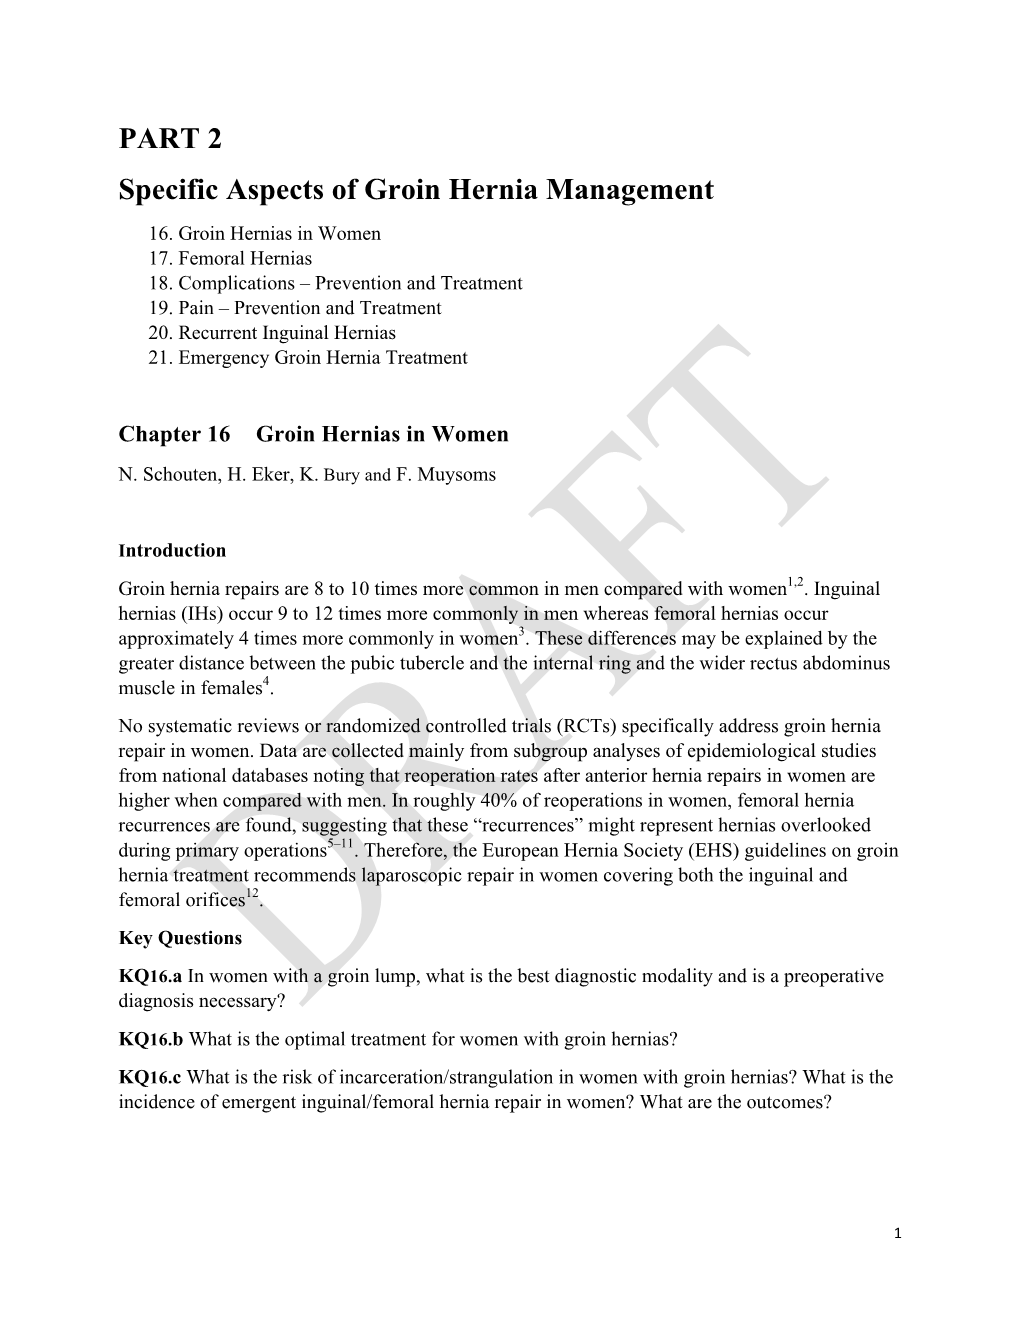 PART 2 Specific Aspects of Groin Hernia Management 16